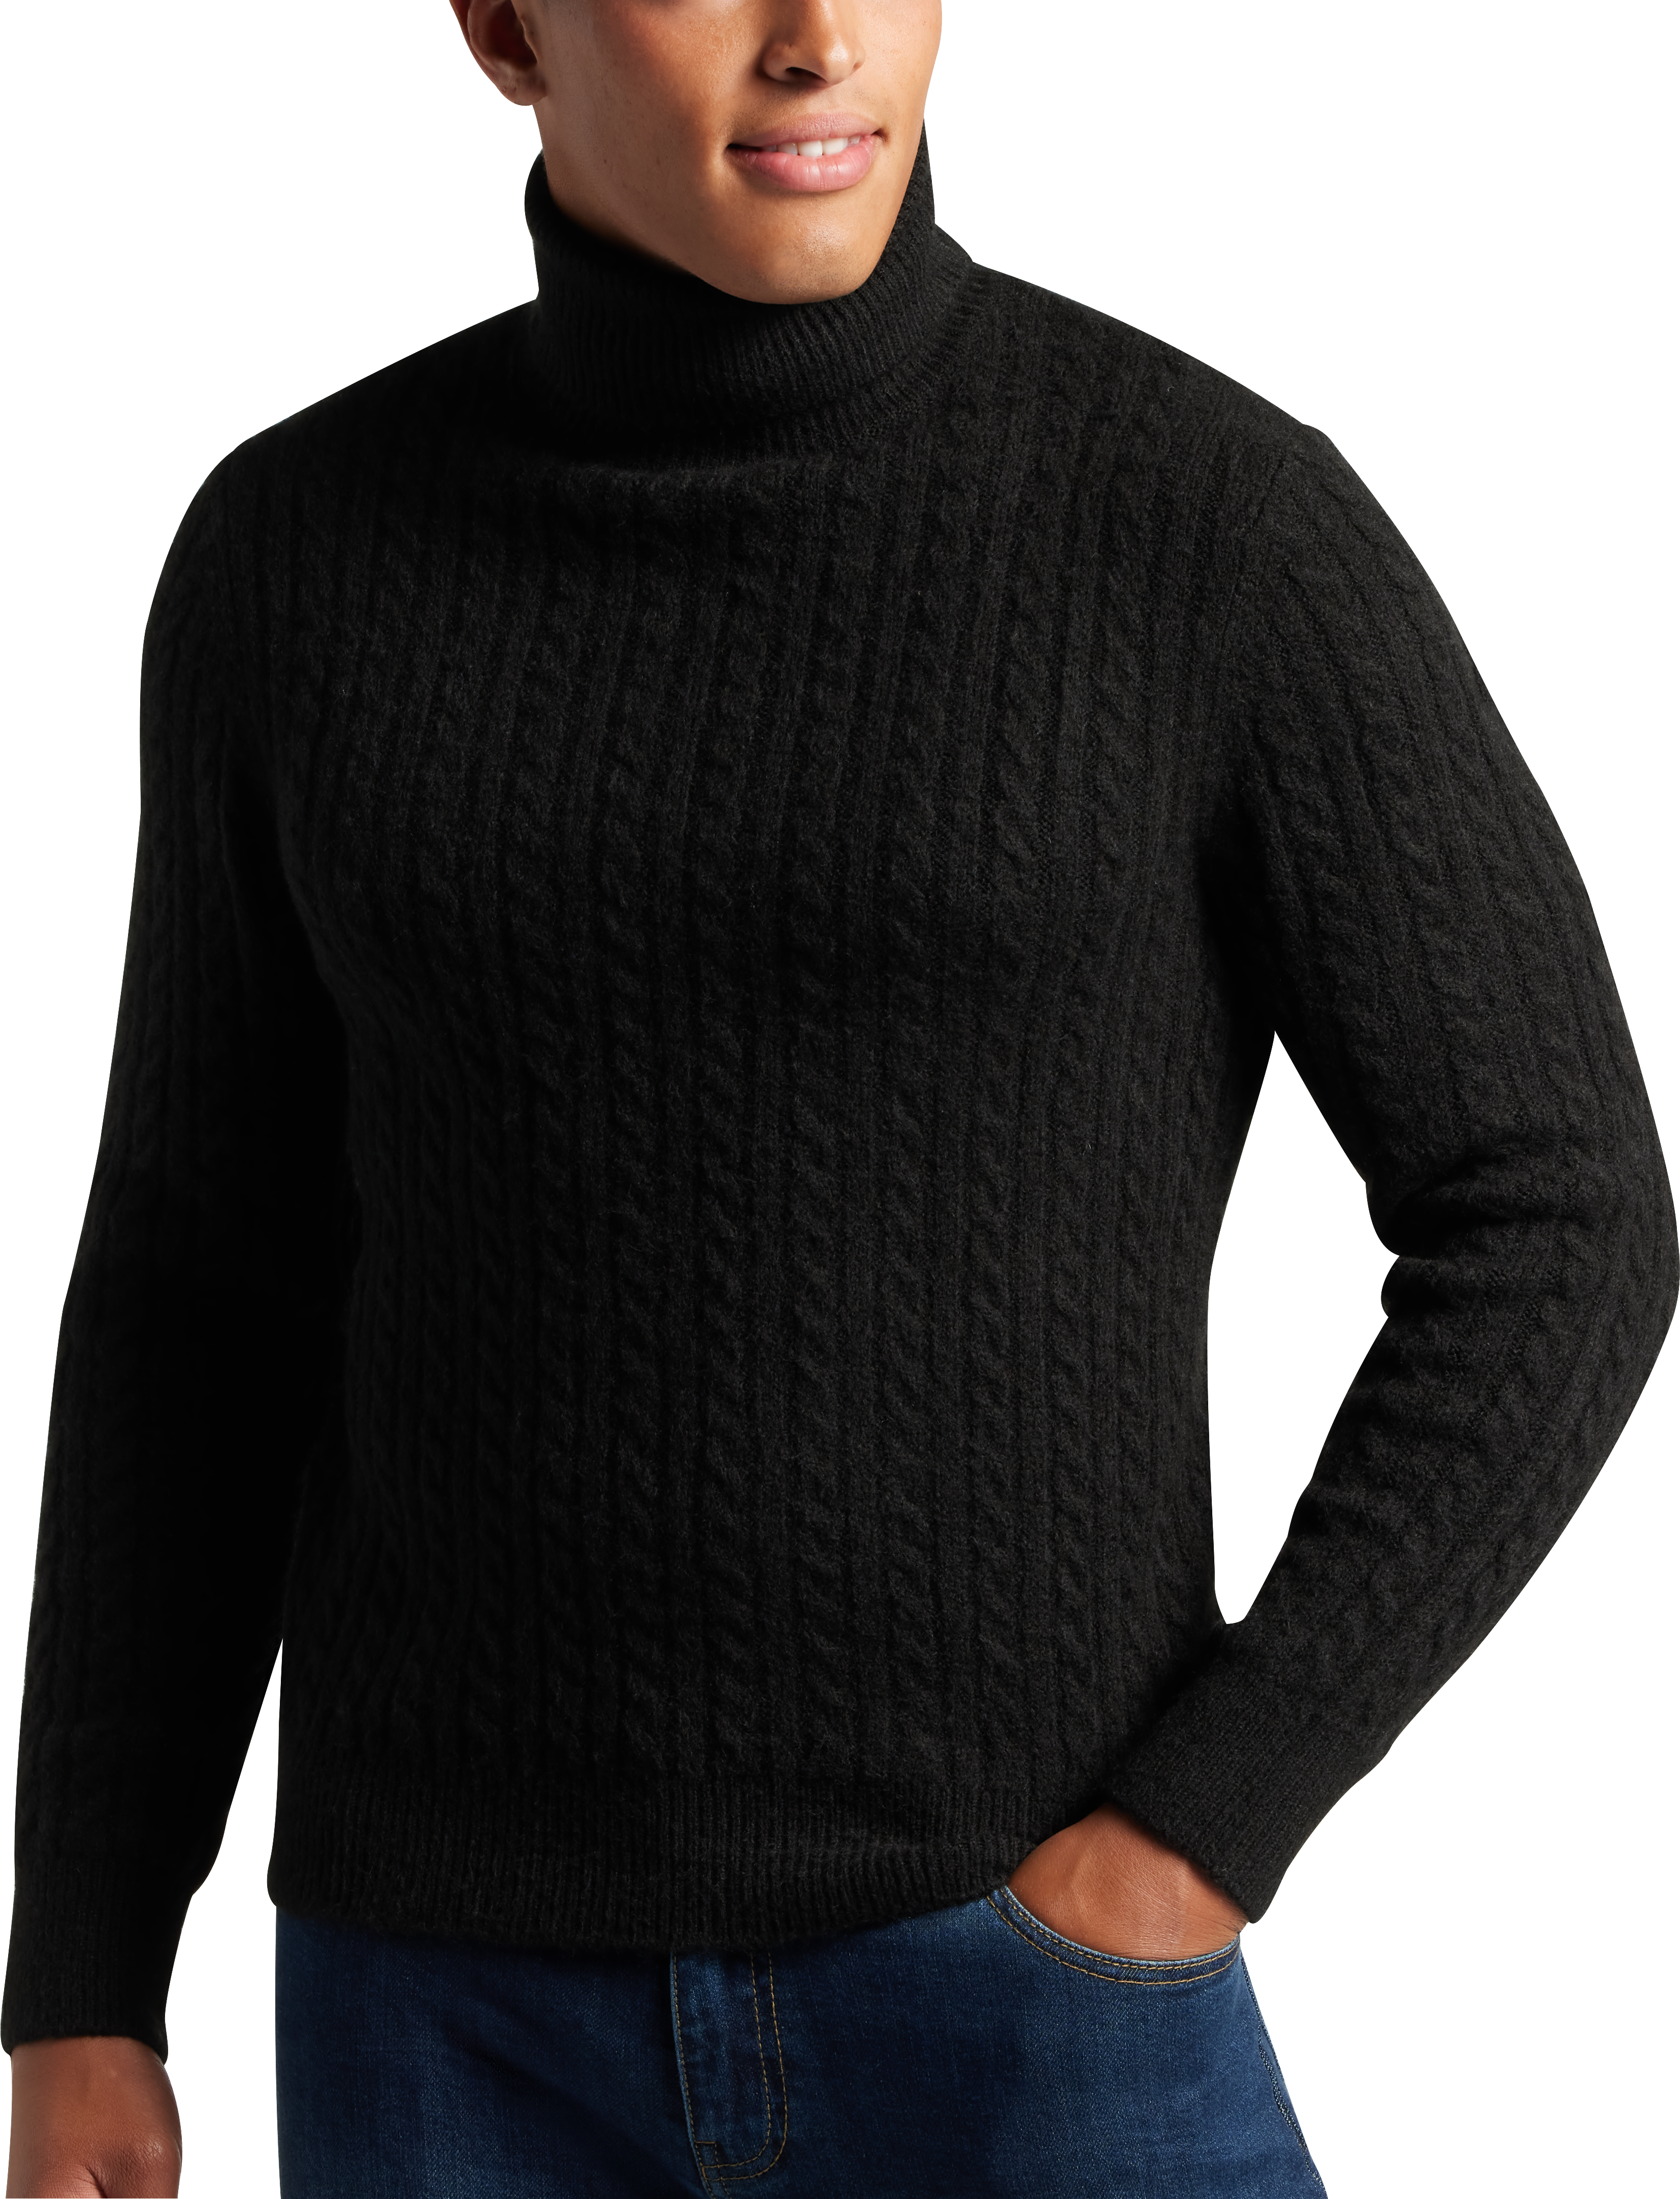 Paisley & Gray Slim Fit Cable Knit Turtleneck Sweater, Men's Sweaters